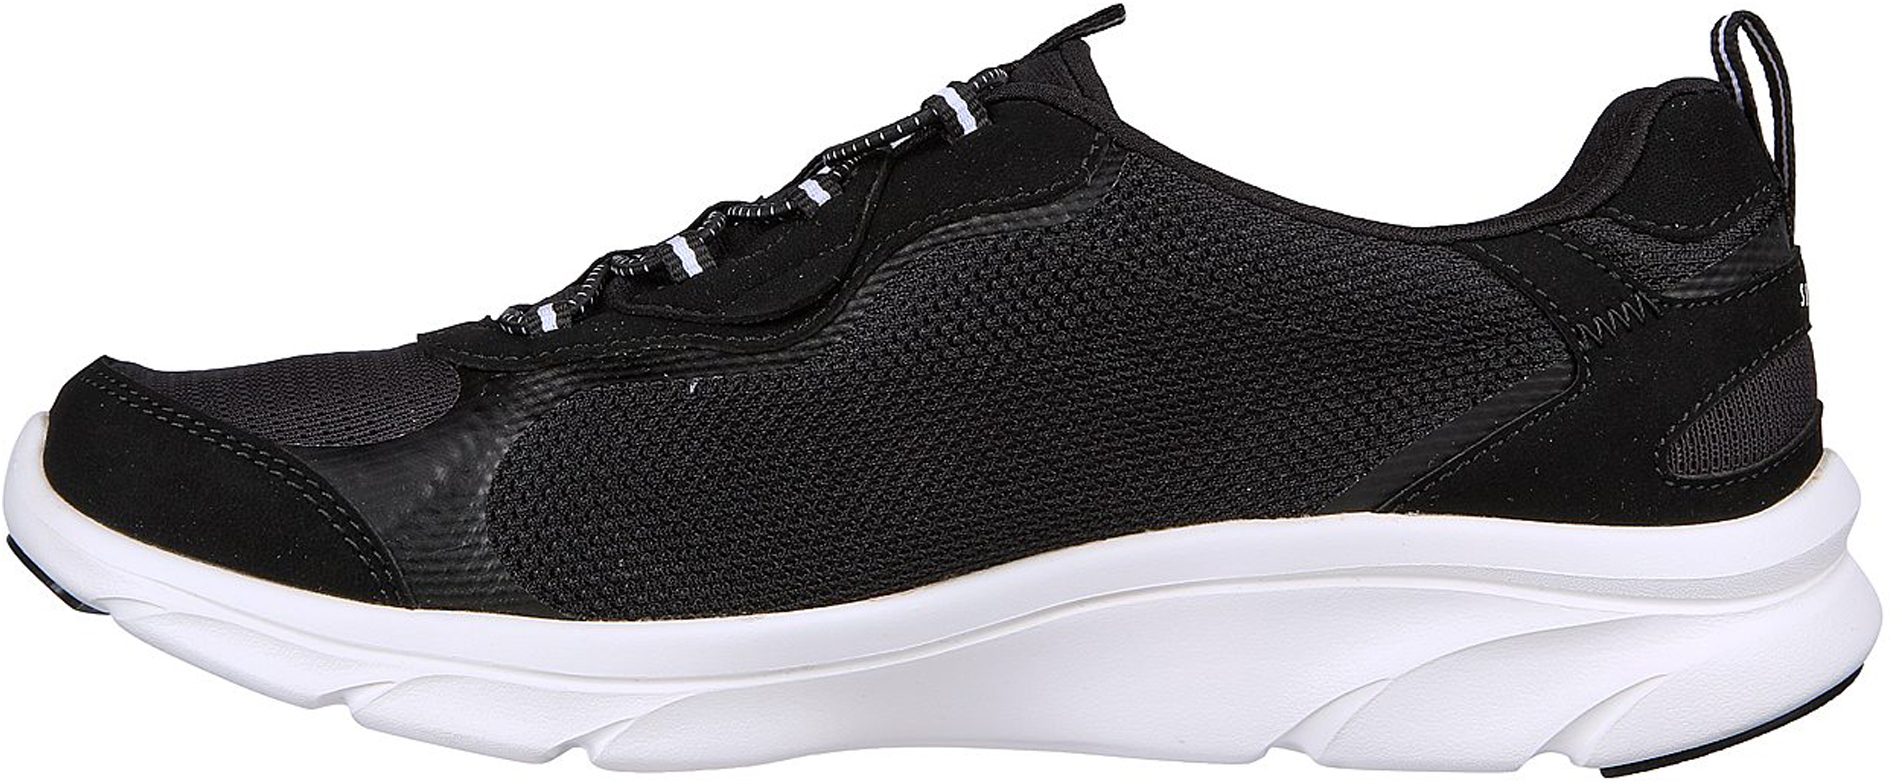 Skechers Relaxed Fit: D'Lux Comfort - Bliss Galore Black / White 104336 ...